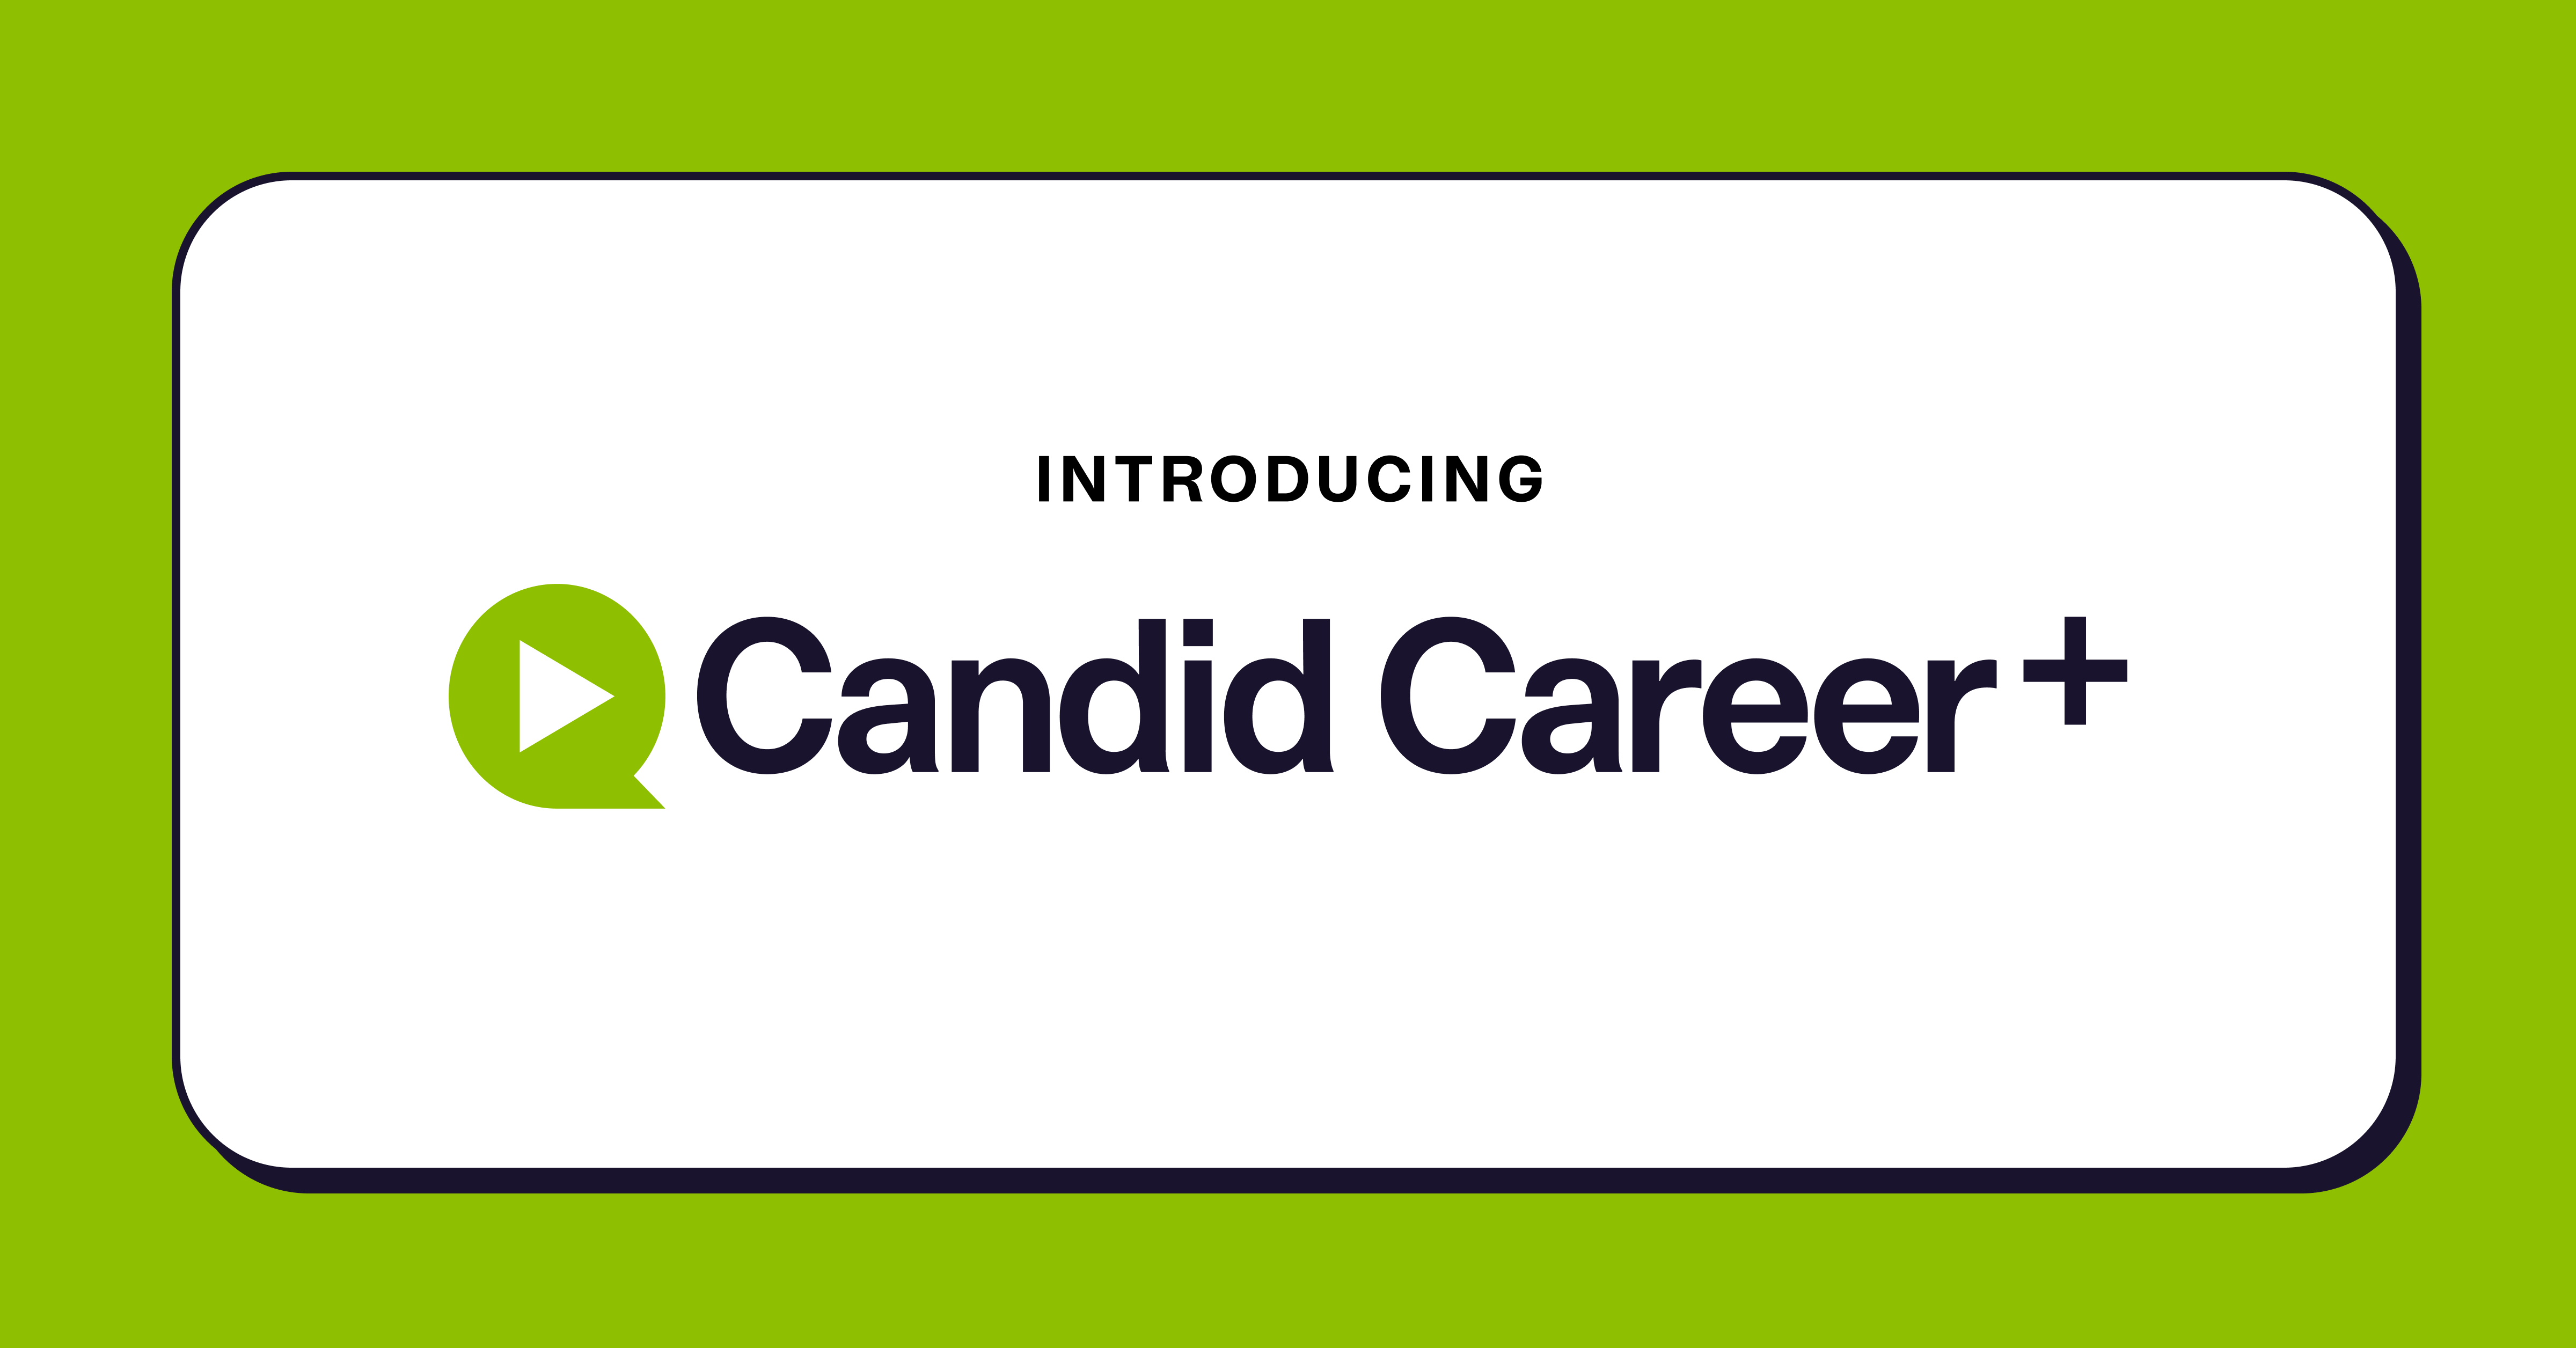 uConnect Introduces Candid Career+: The New and Improved, Premier Video Library for Career Services